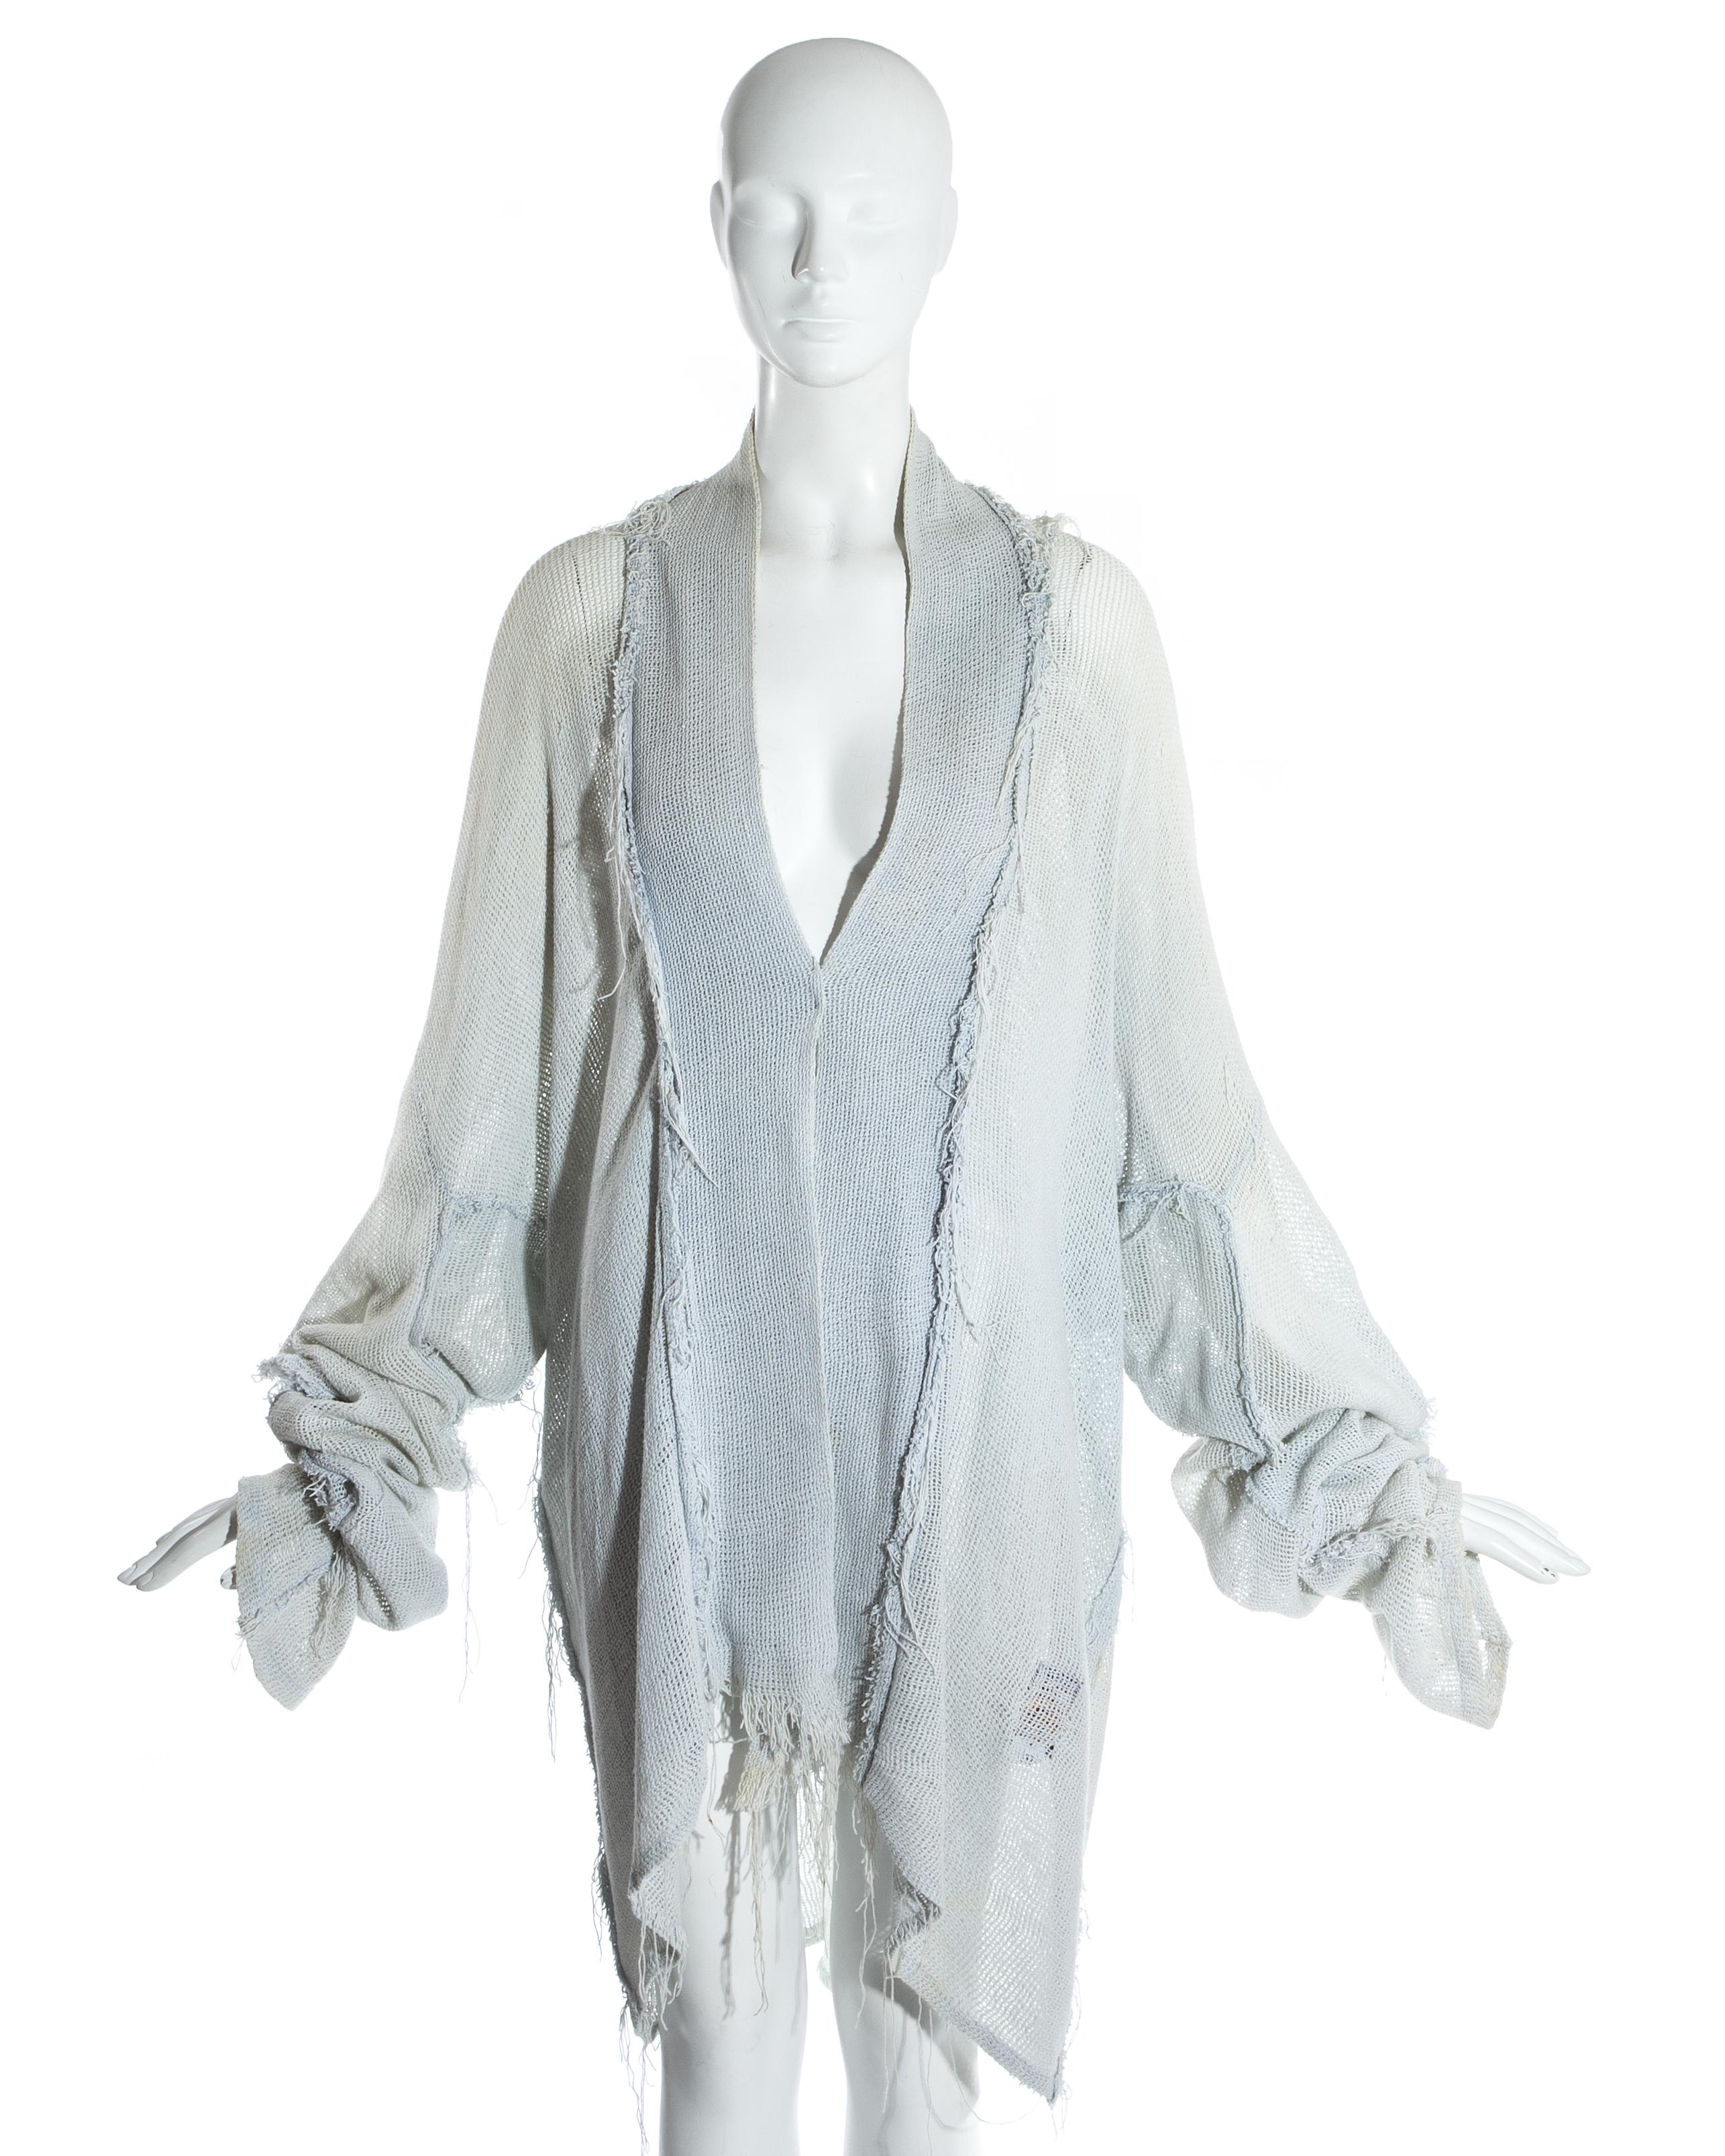 Worlds End by Vivienne Westwood and Malcolm McLaren; Oversized dove grey cotton gauze jacket. Extra long sleeves, inverted frayed seams and square cut shoulders. Worn open with no closures. 

'Punkature', Spring-Summer 1983 